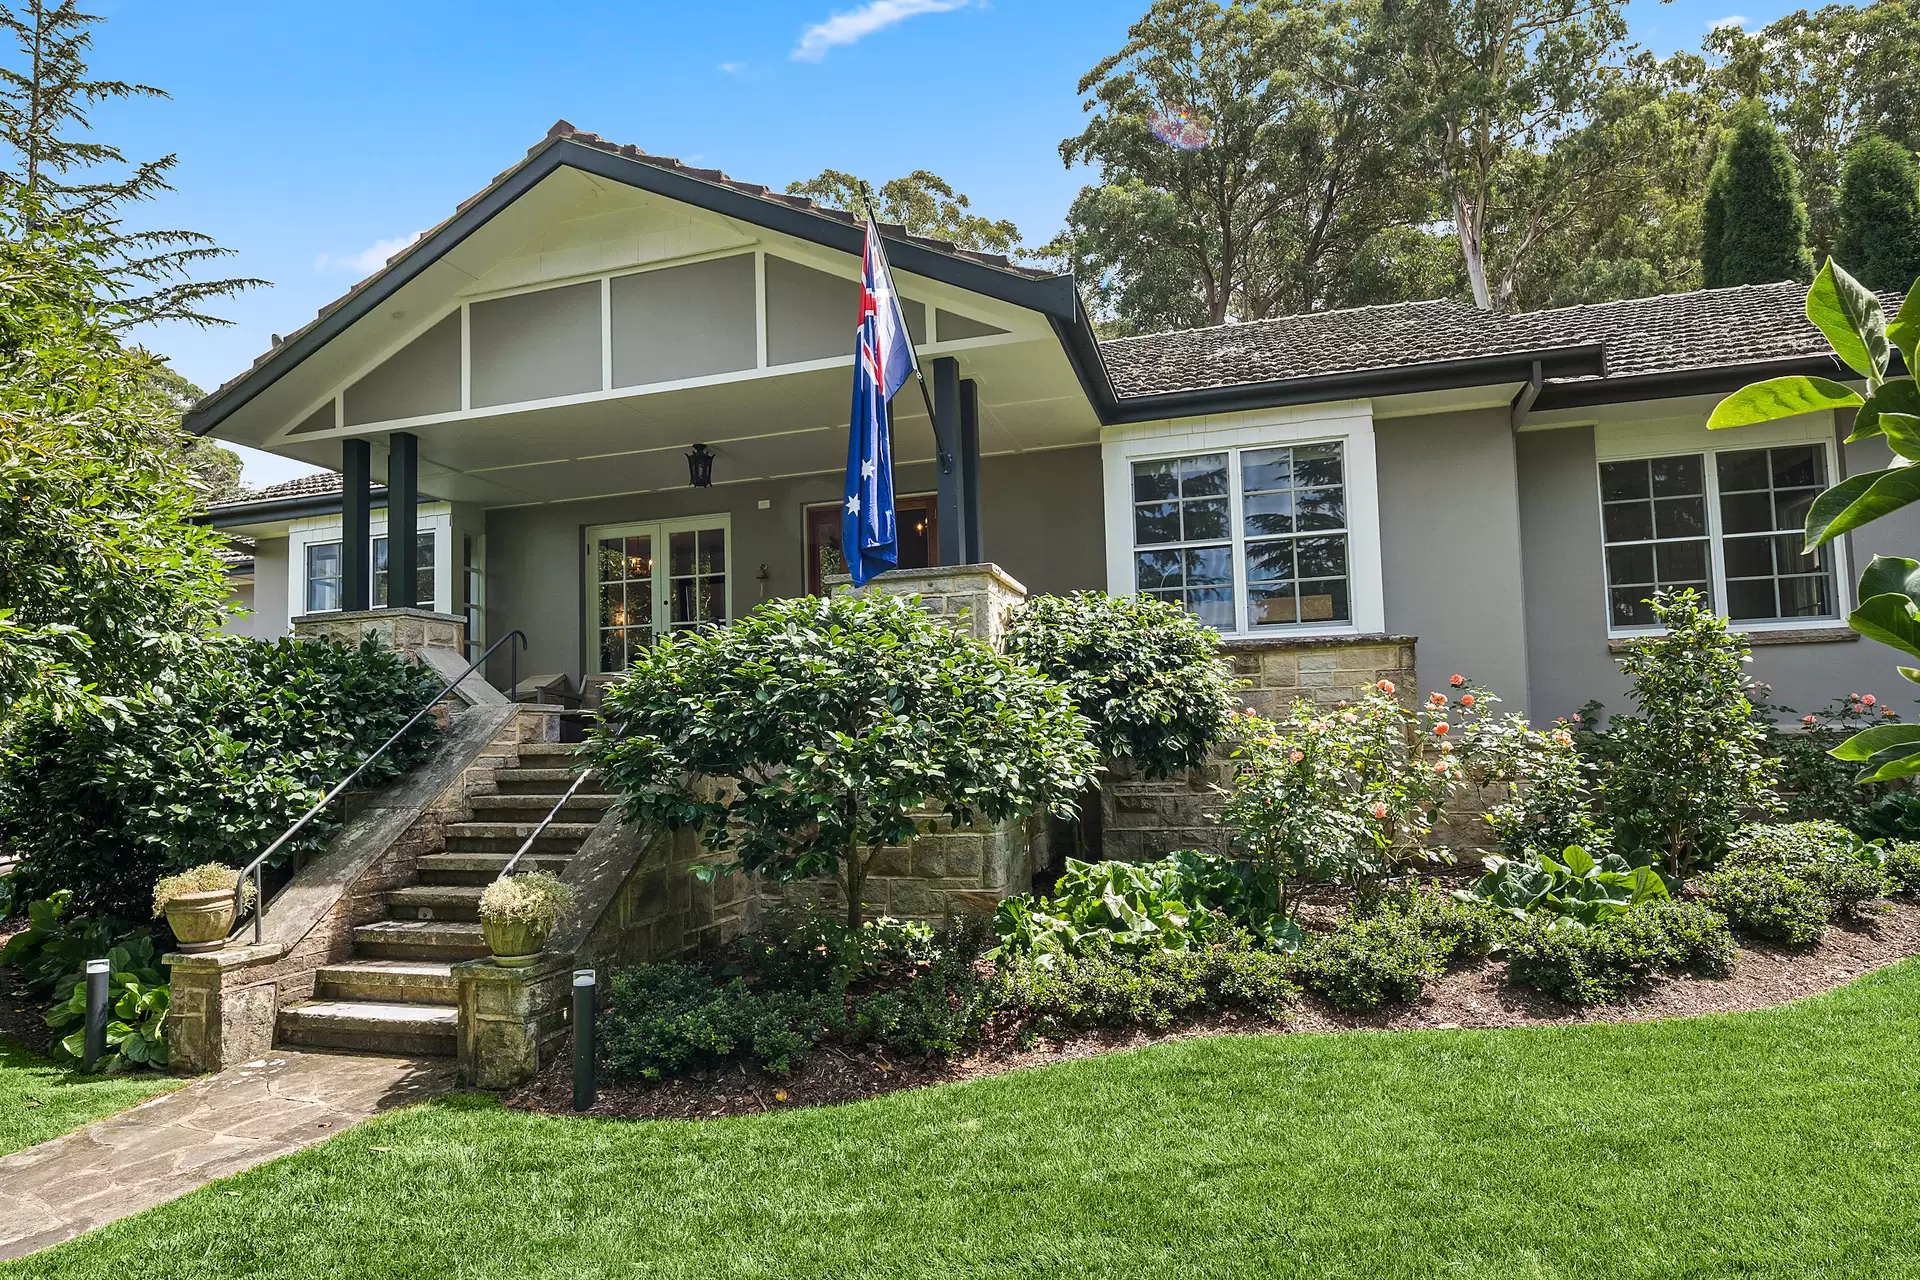 Photo #1: 10 St Clair Street, Bowral - Sold by Drew Lindsay Sotheby's International Realty